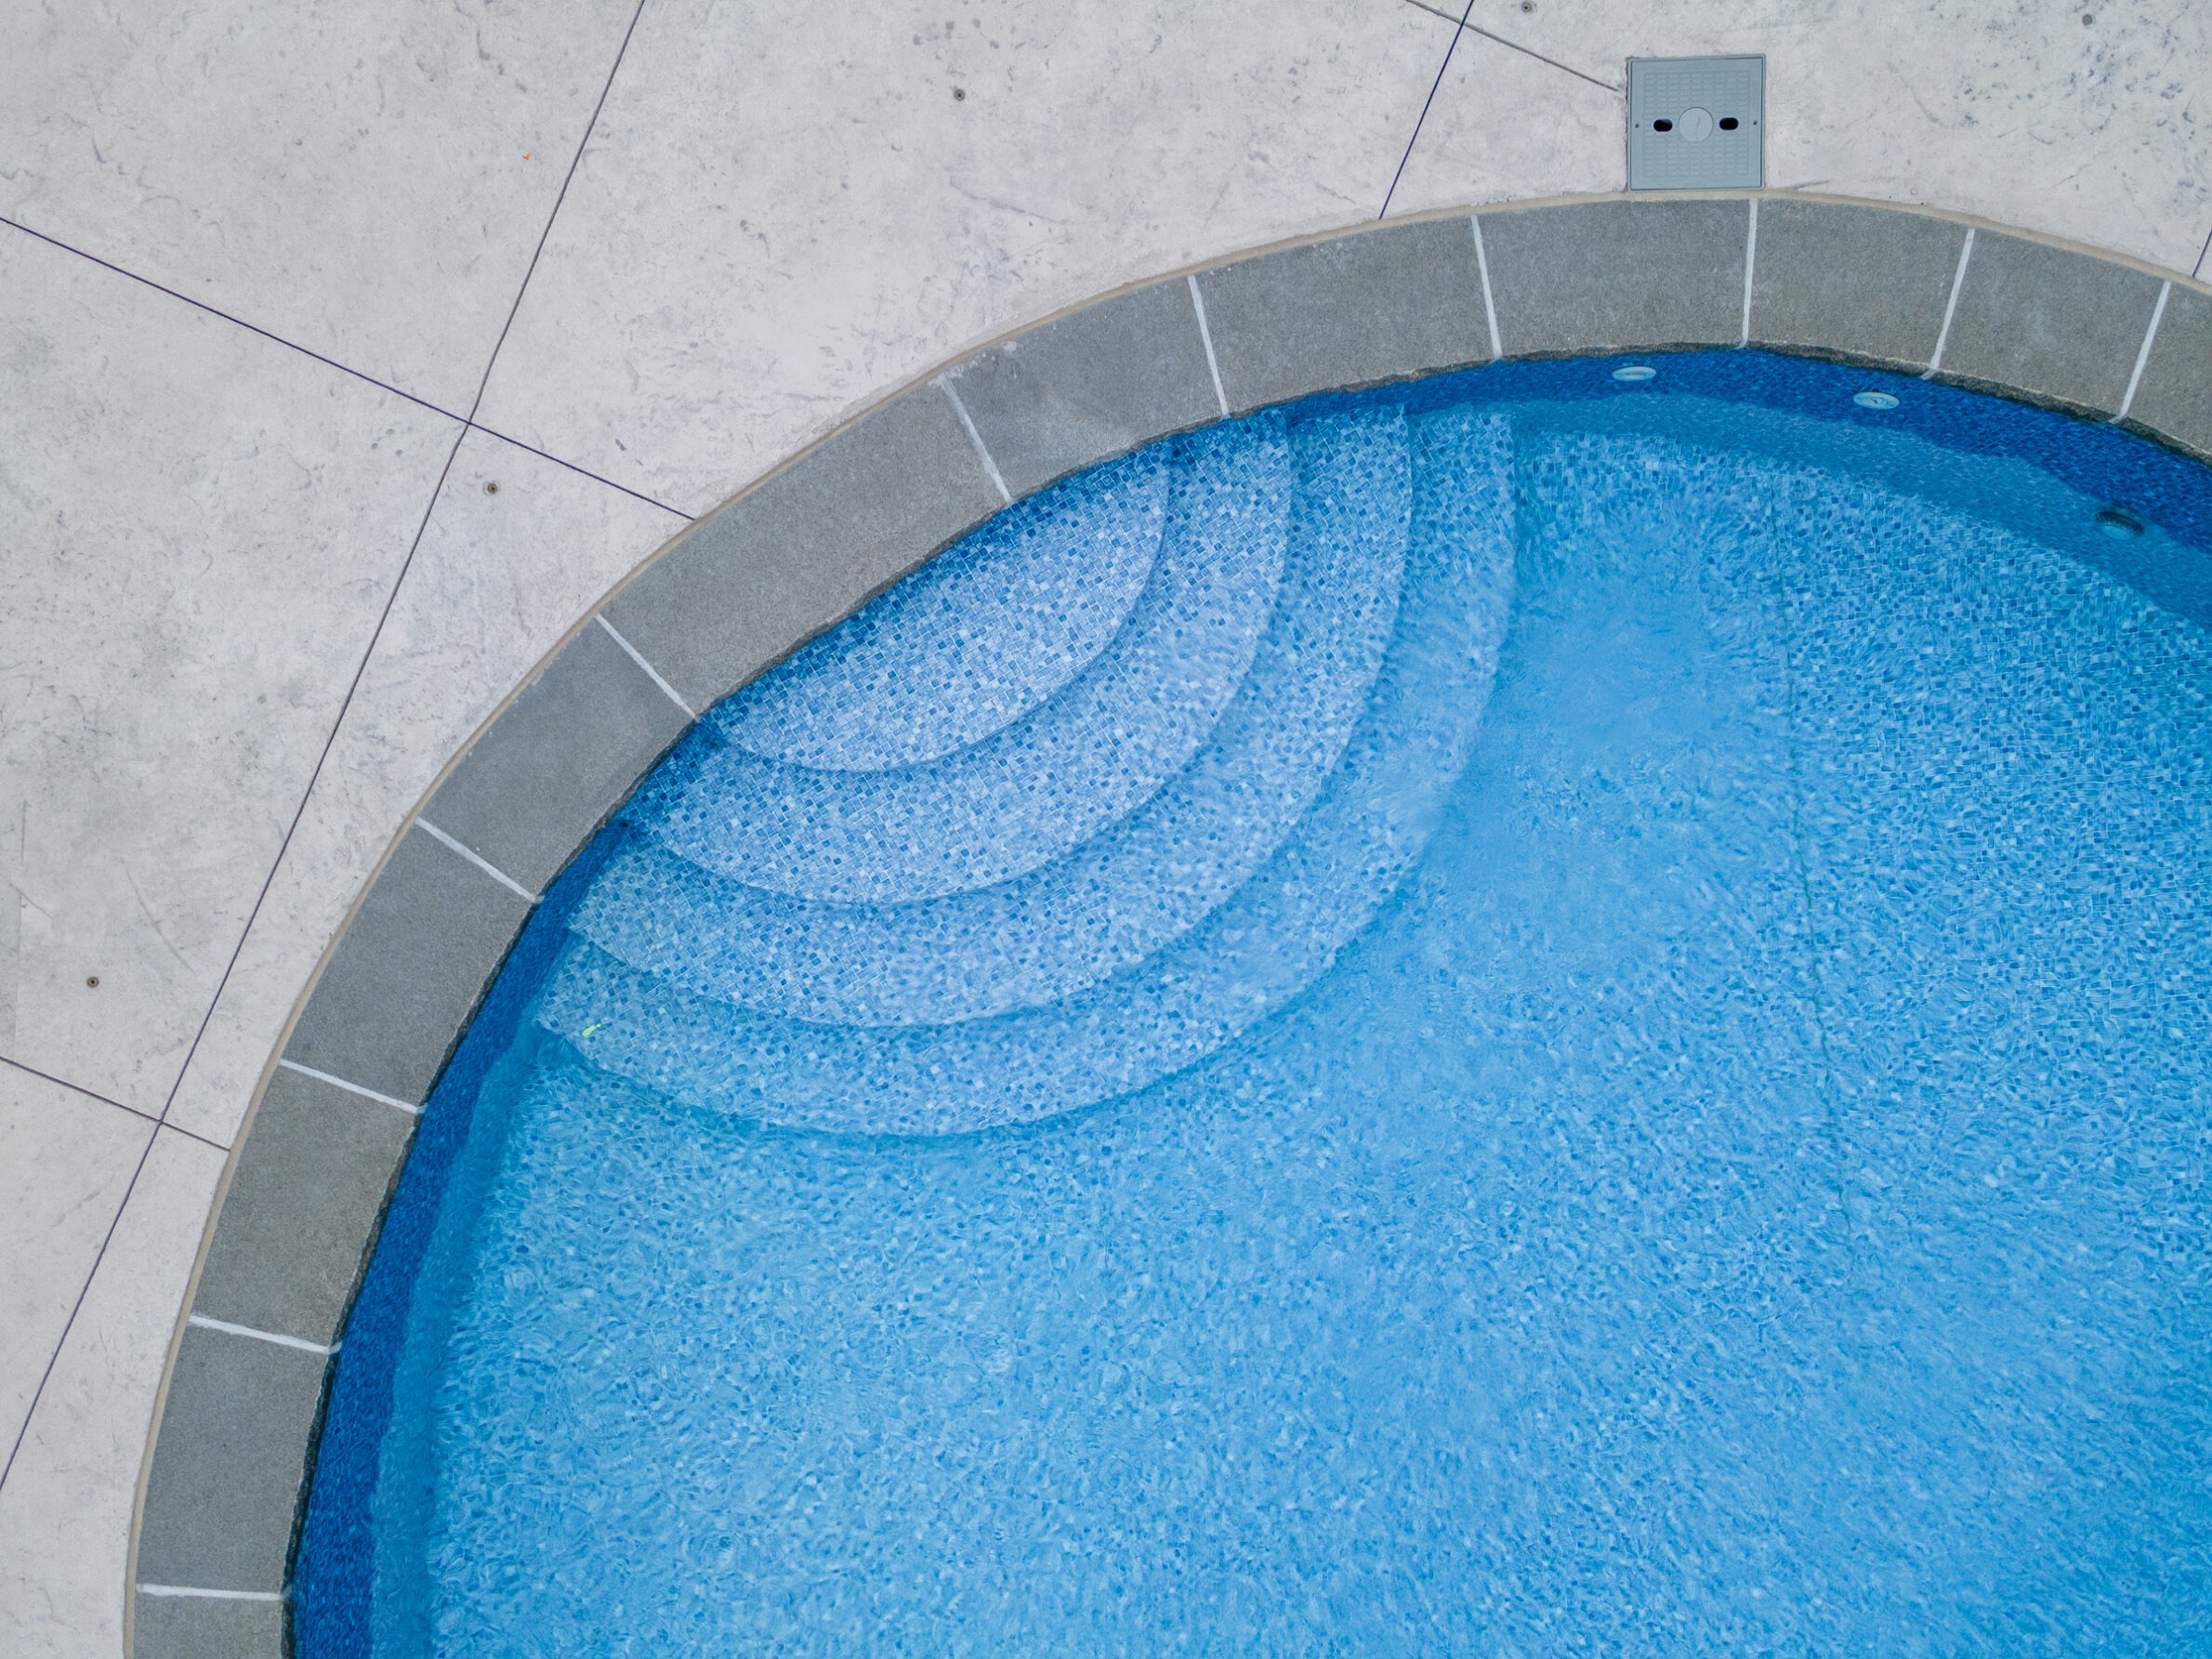 This is an aerial view of a corner of a circular pool with steps leading into the water, surrounded by a tiled surface, with a pool light visible.